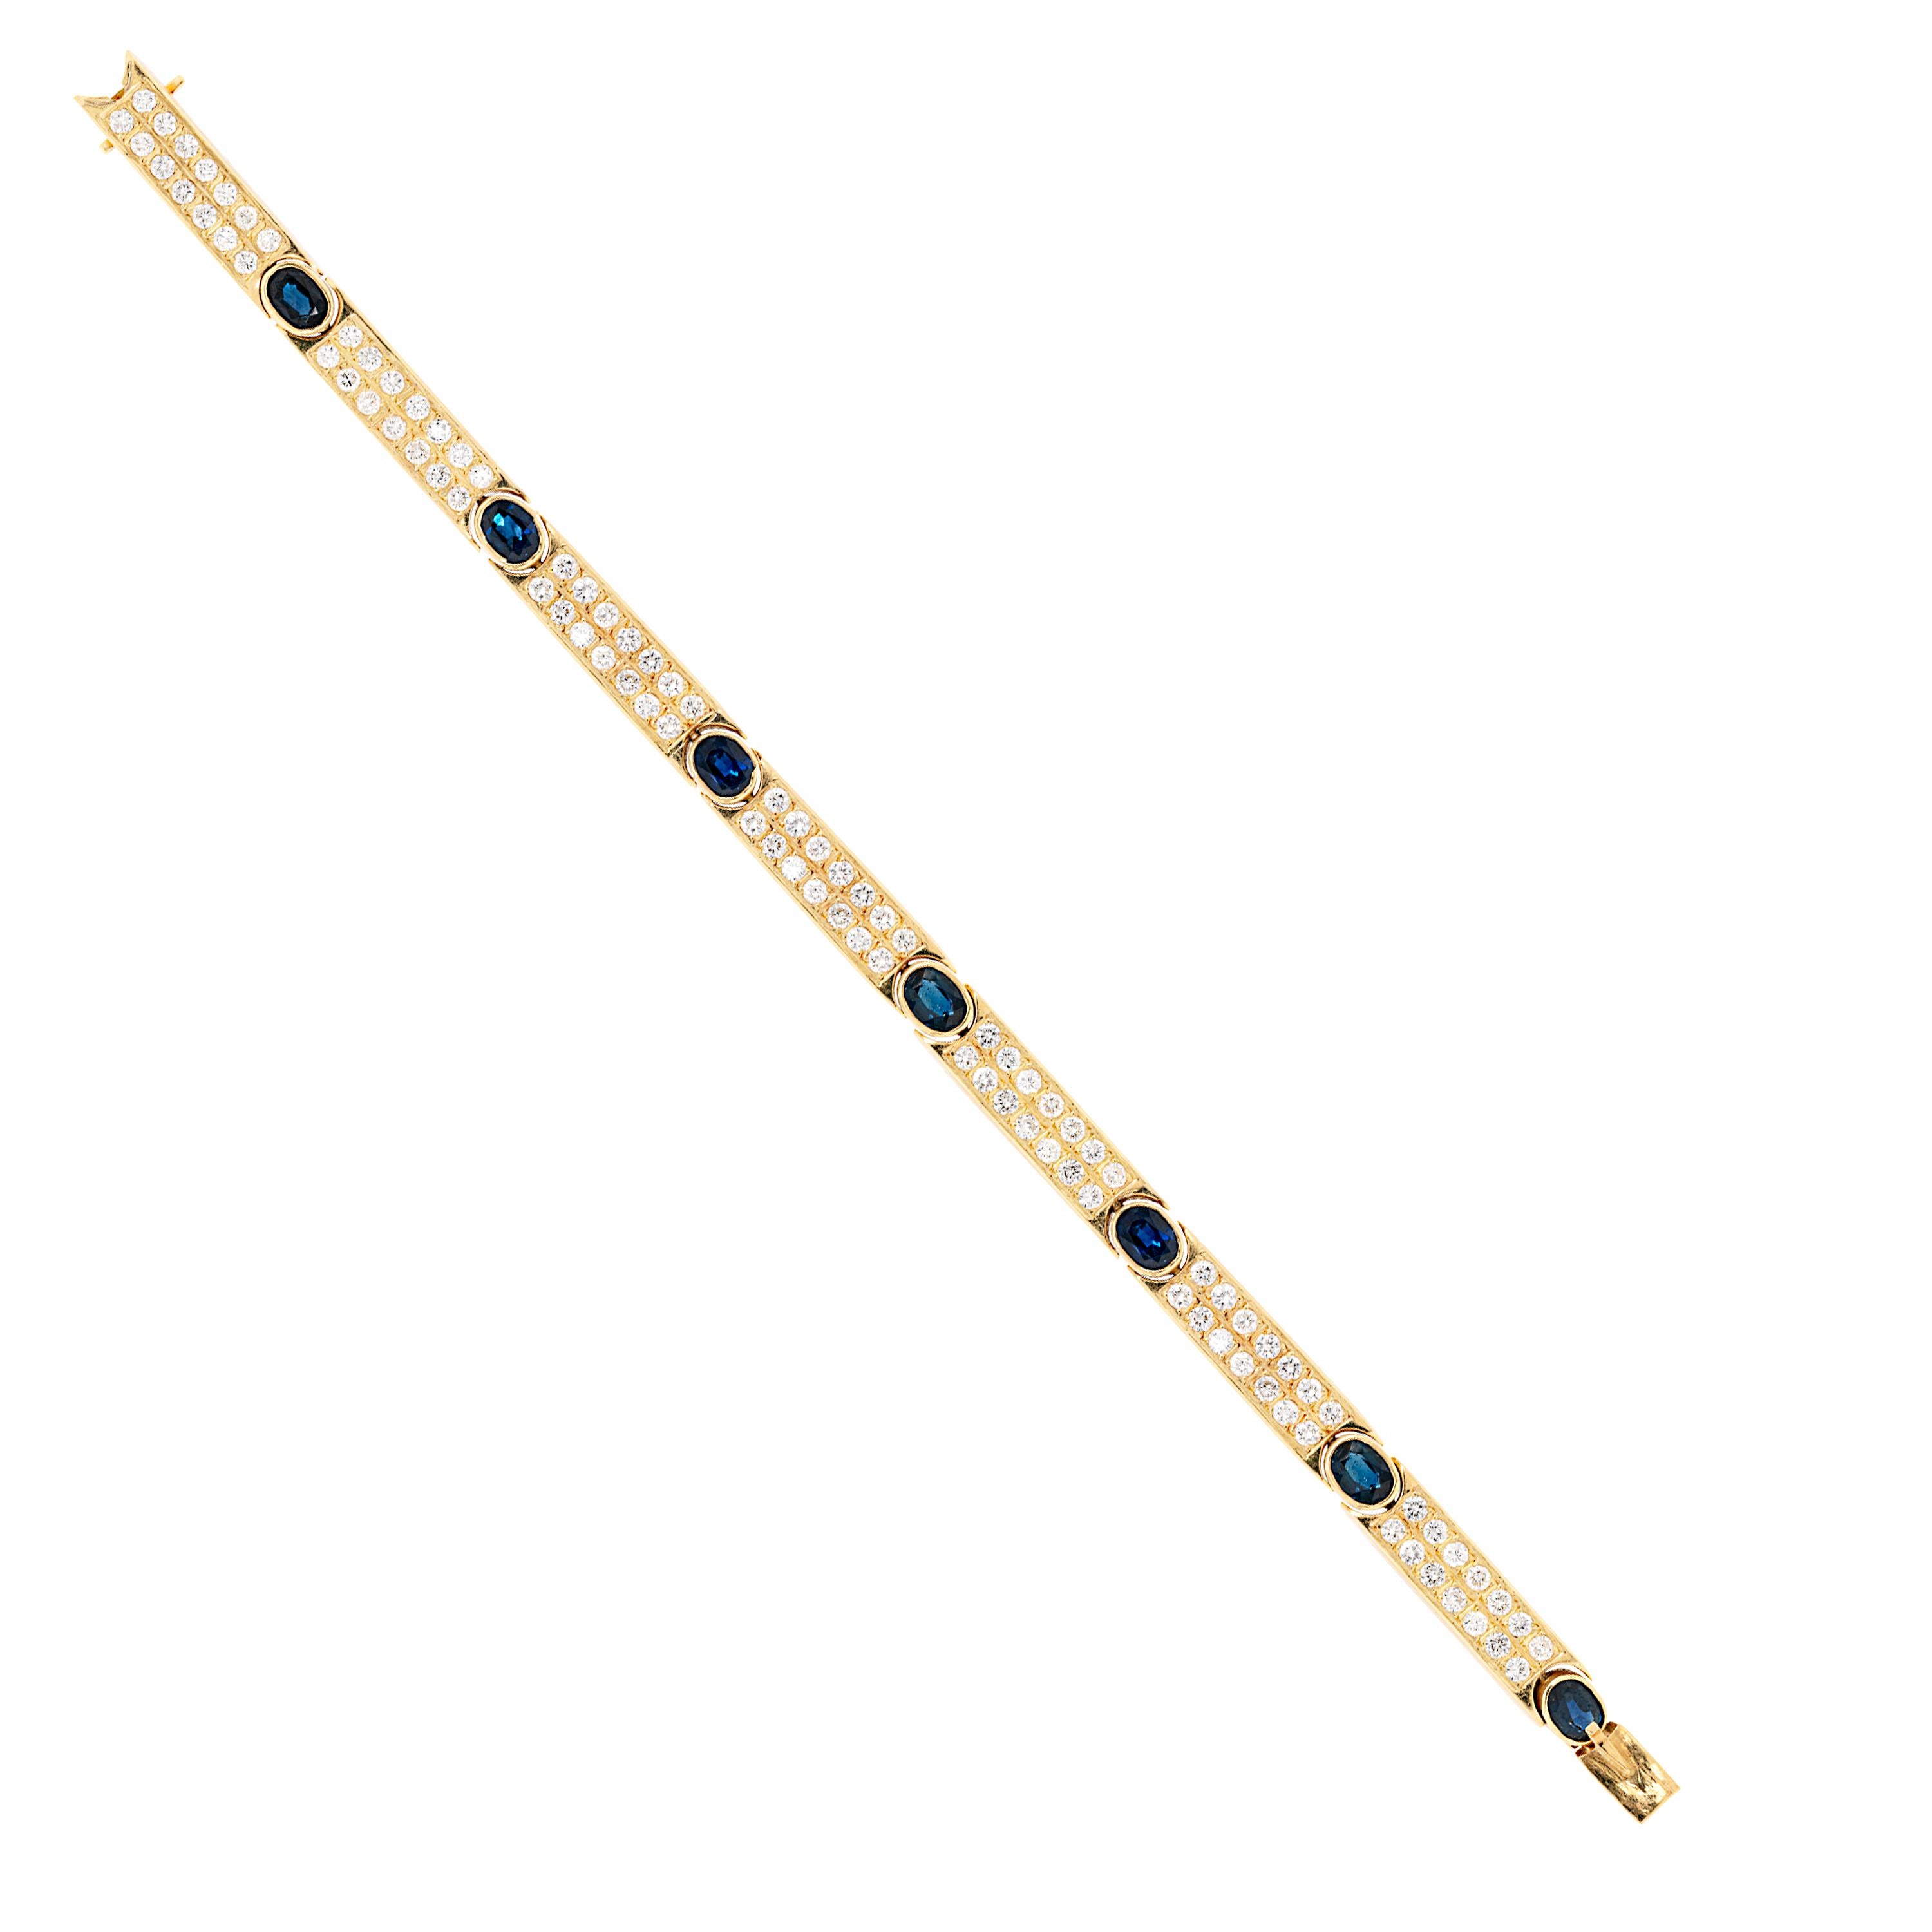 Vintage bracelet created with seven diamond set gold bars each connected by seven oval shaped blue sapphires weighing an approximate total weight of 5.00ct+ all mounted in open back rubover settings. The bracelet features a total of 98 fine quality